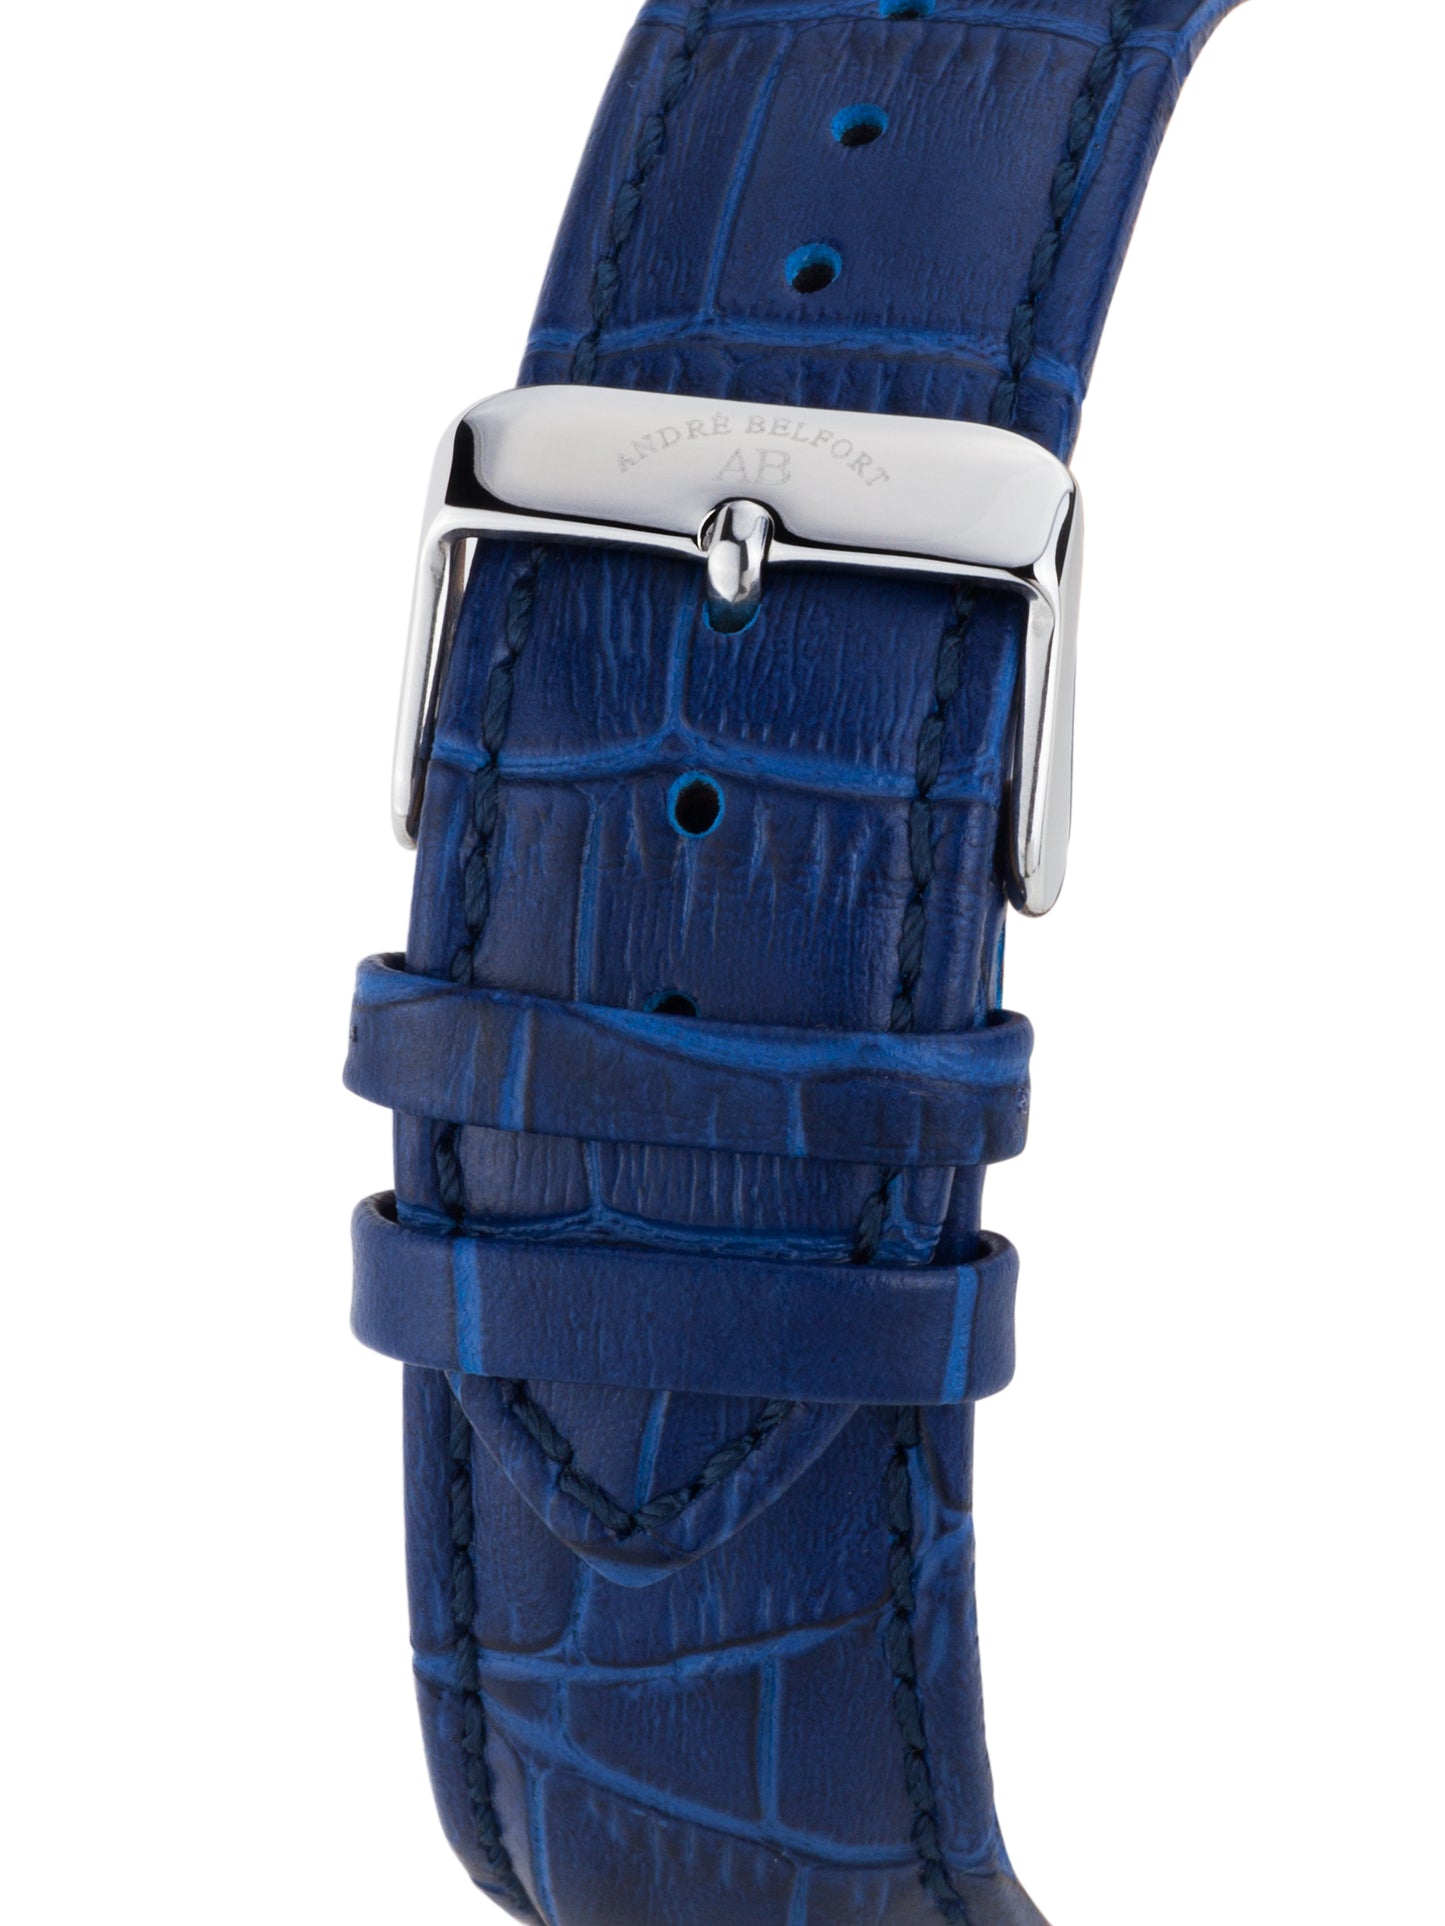 bracelet watches — leather band Empereur — Band — blue steel